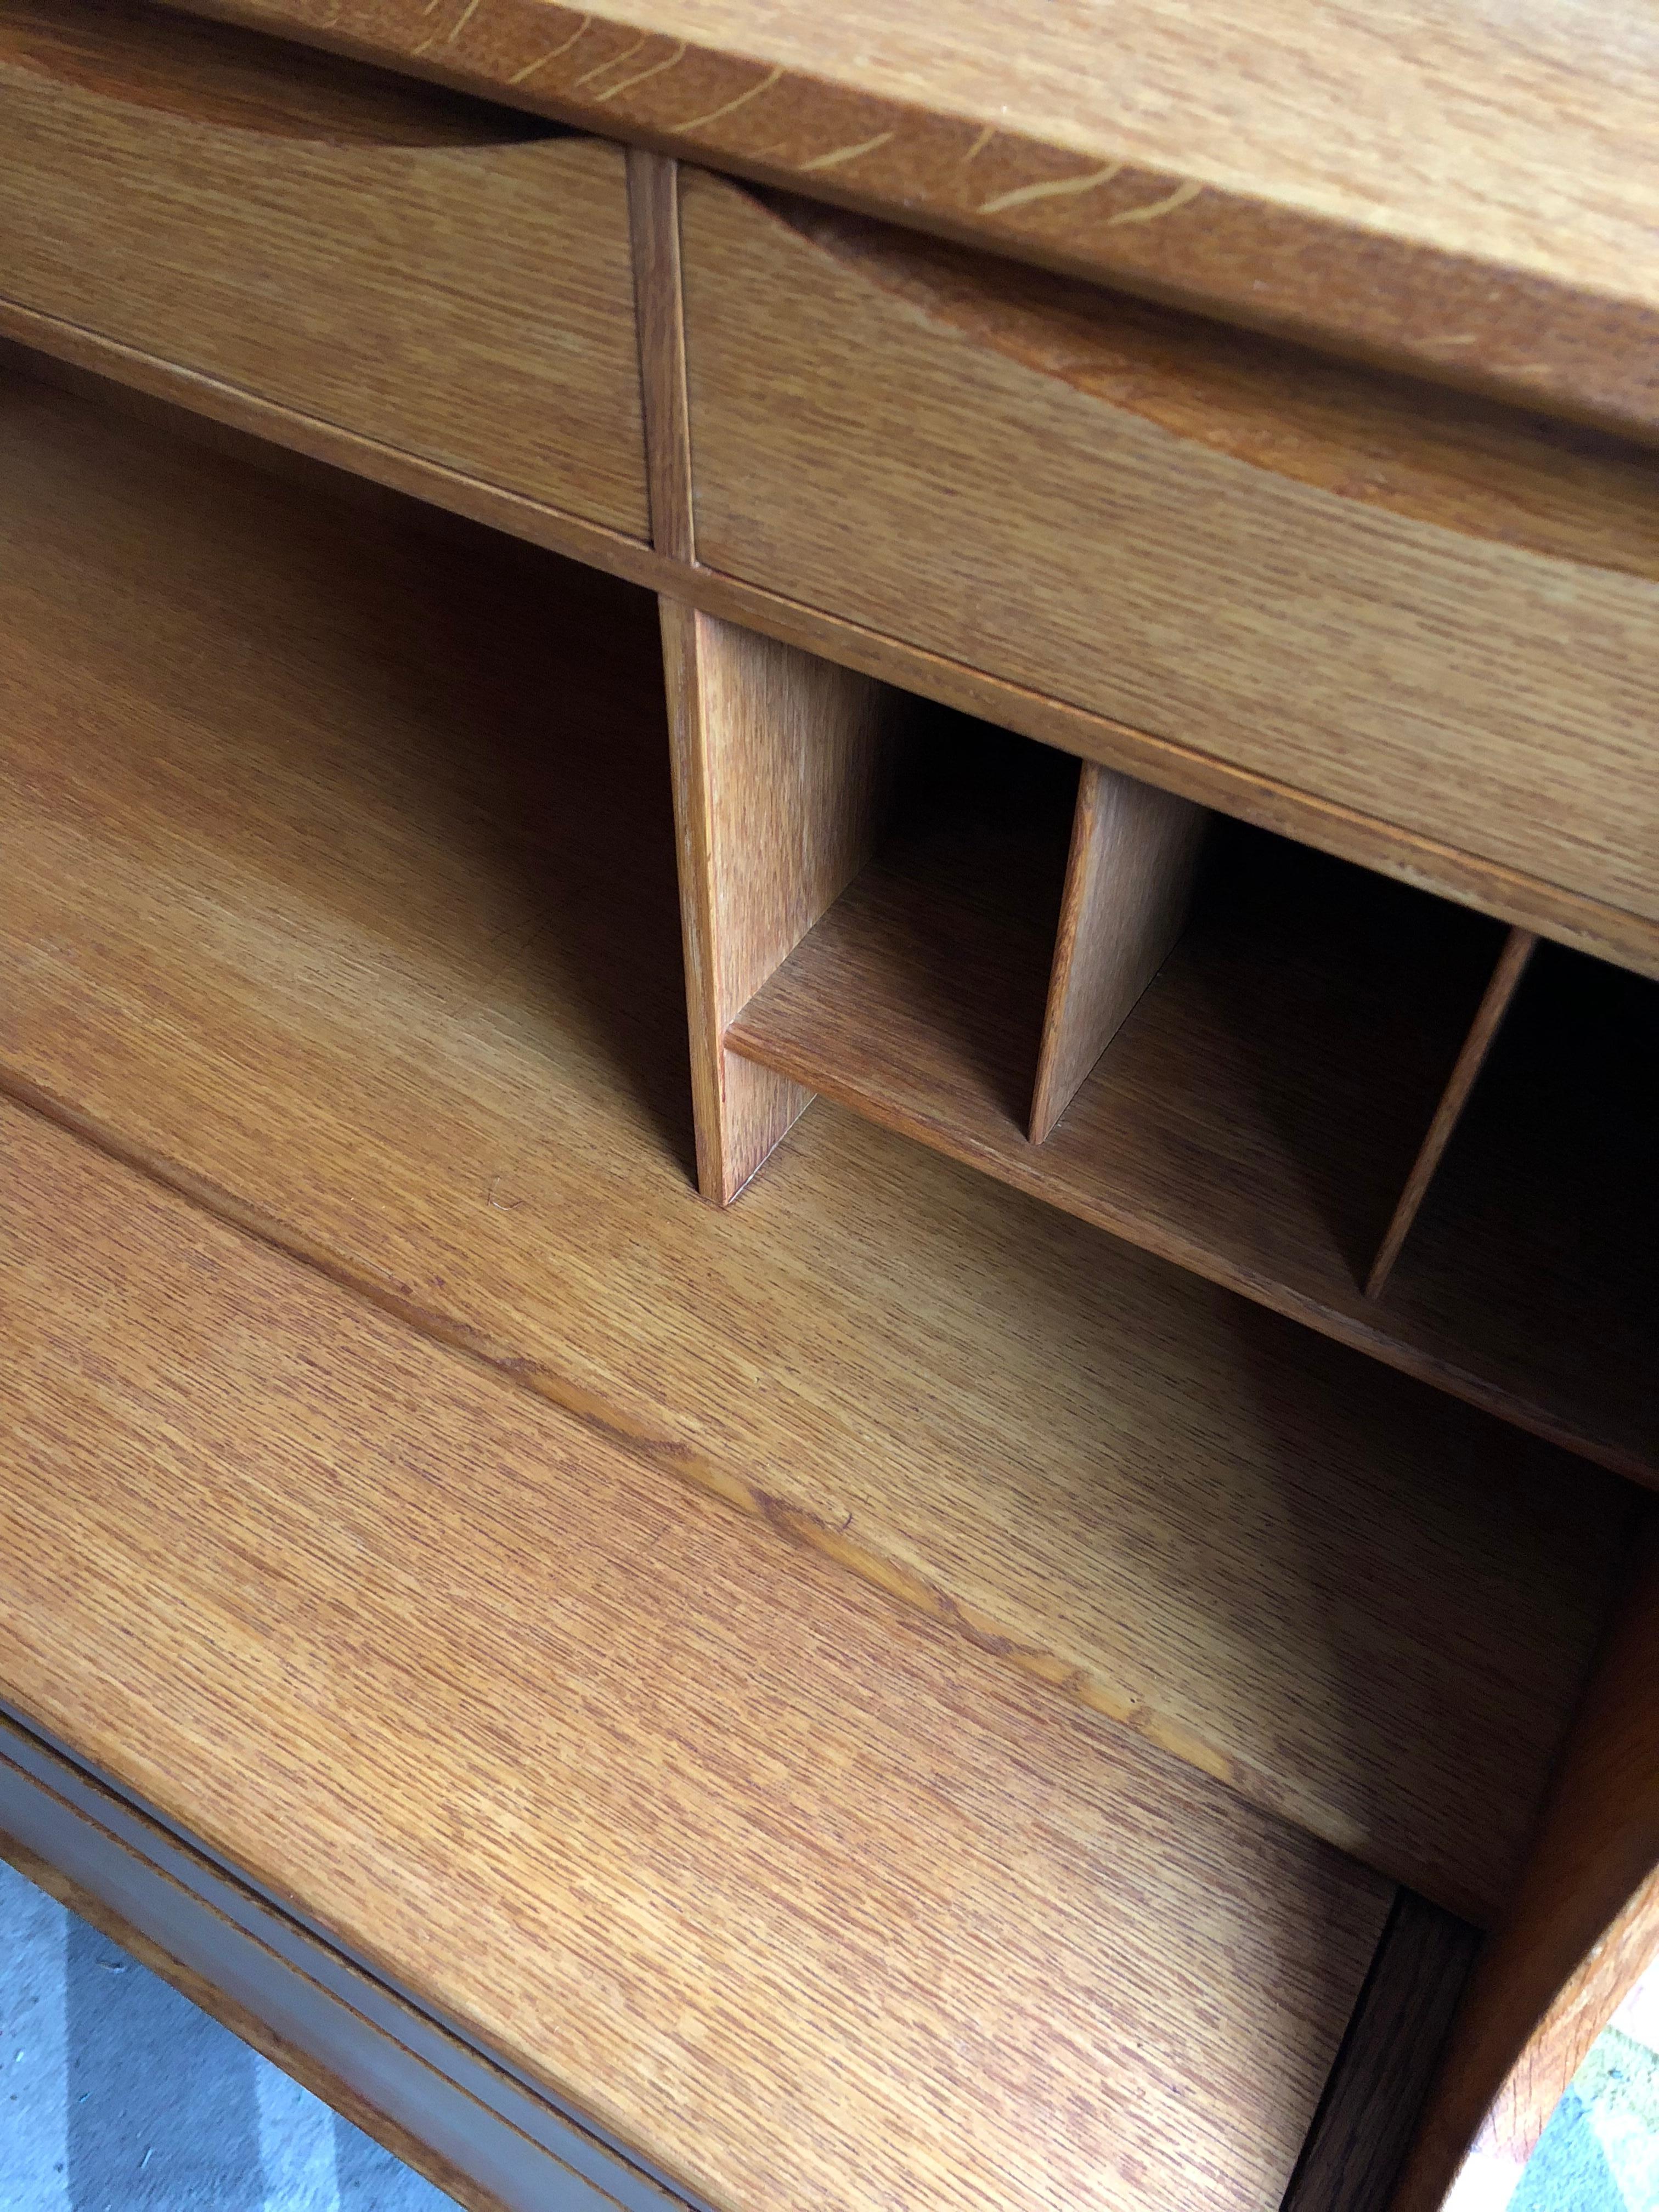 A well designed and crafted Secretaire Bureau from Orum Møbler, Denmark, circa 1960. This can also be used as a vanity unit with its interior mirror and compartments. Constructed from European white oak. In fantastic condition. Surface has been